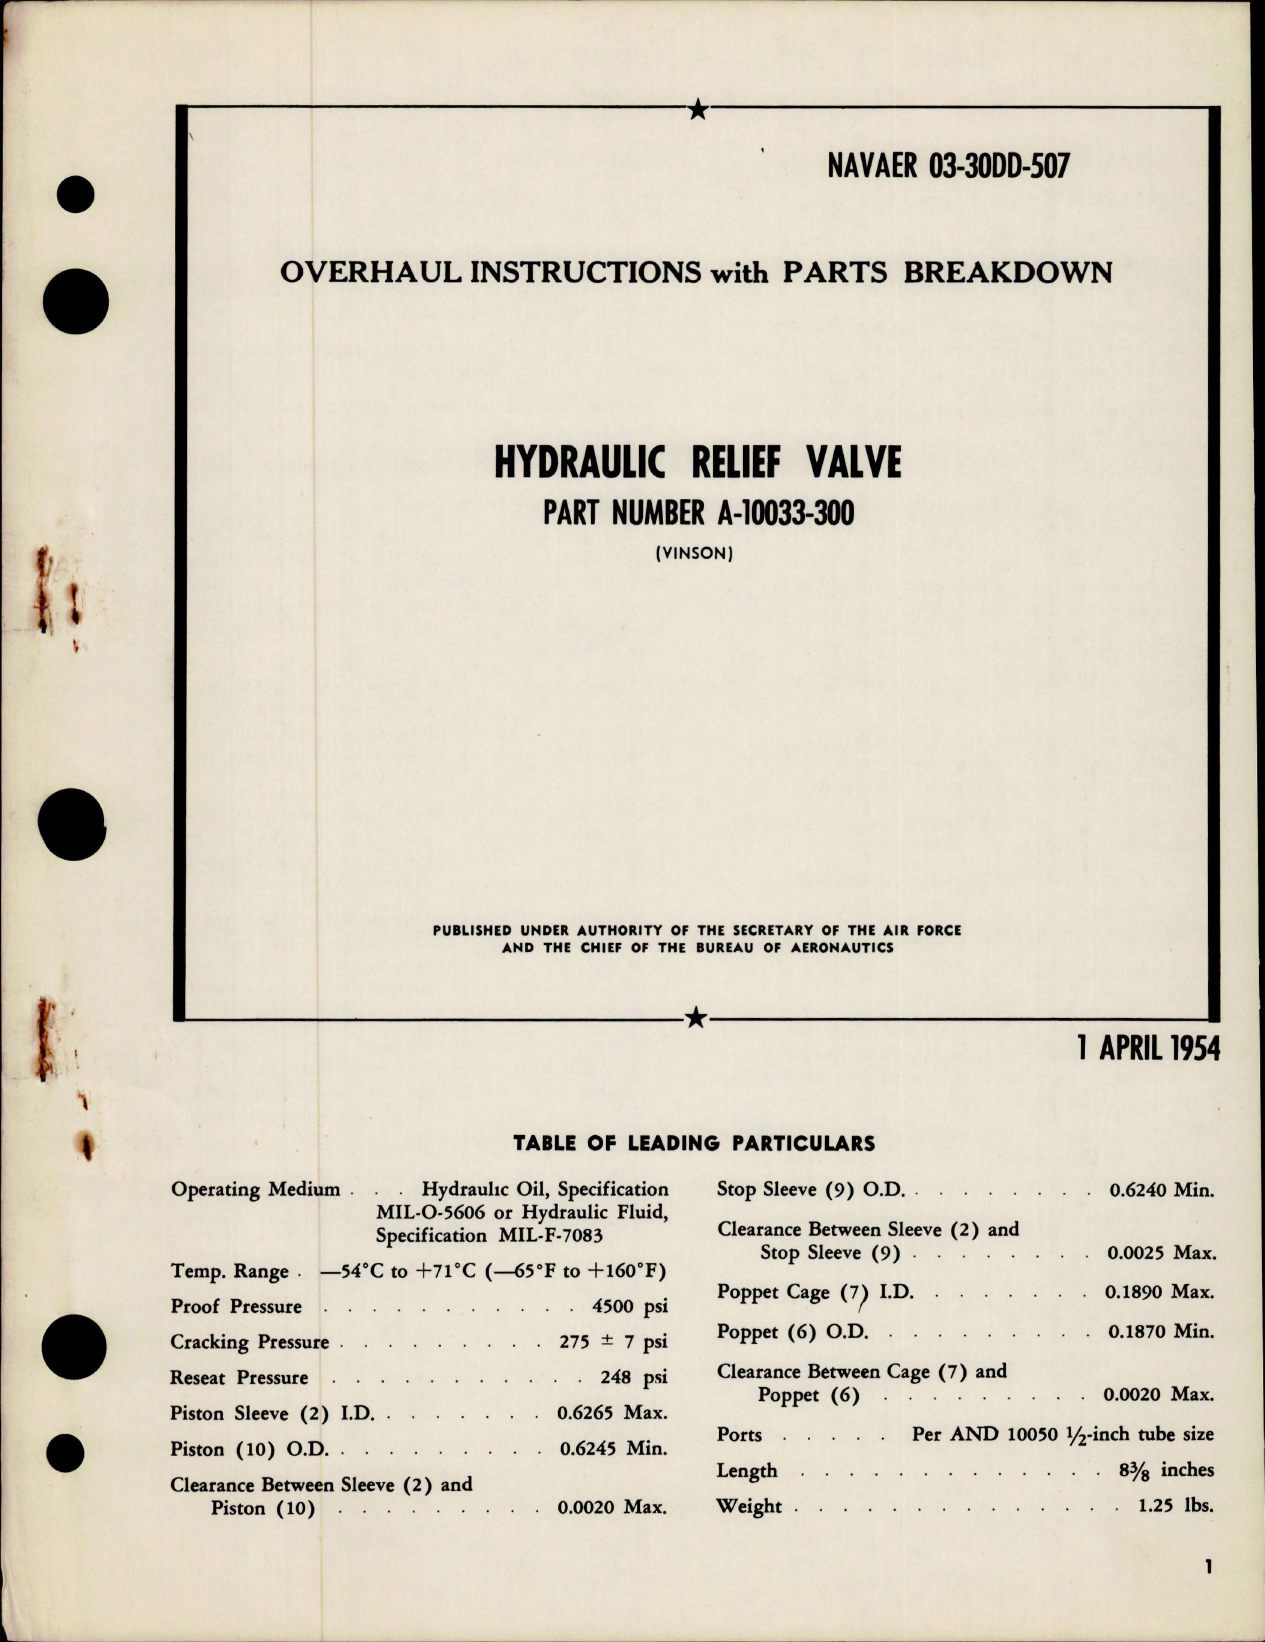 Sample page 1 from AirCorps Library document: Overhaul Instructions with Parts Breakdown for Hydraulic Relief Valve - Part A-10033-300 